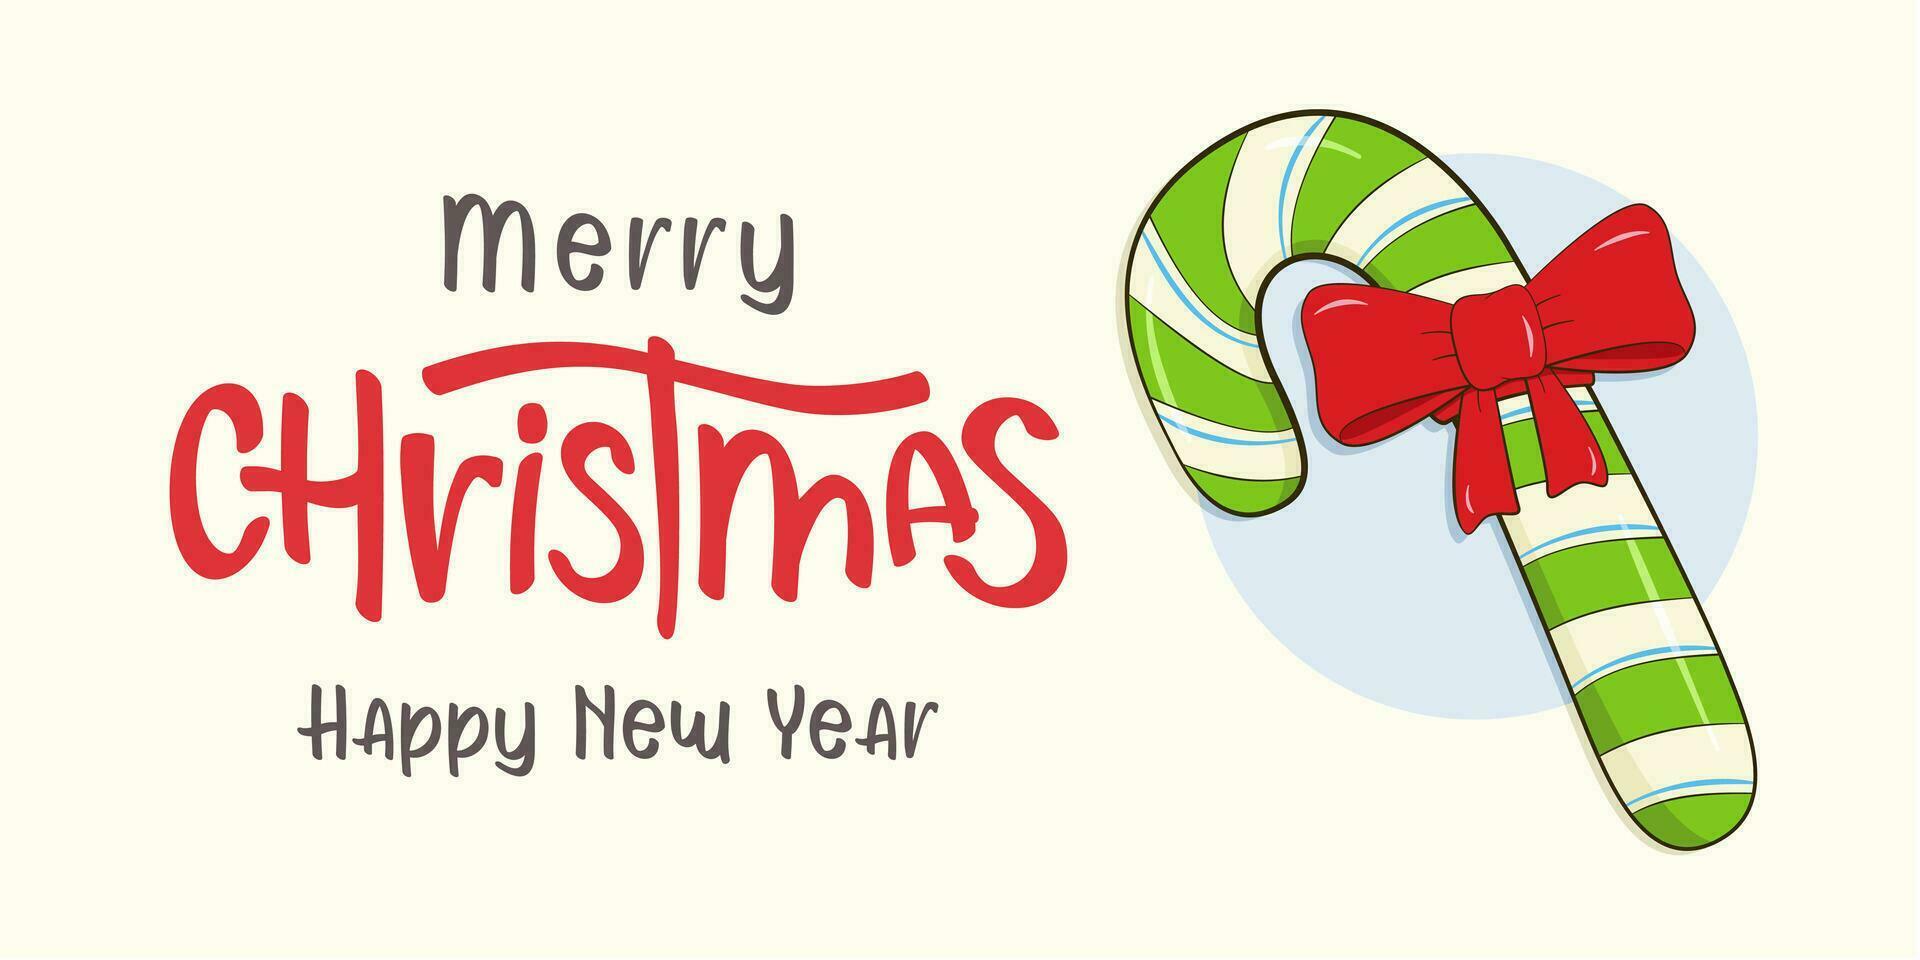 Christmas card with lettering Merry Christmas and Happy New Year. Candy cane with bow vector